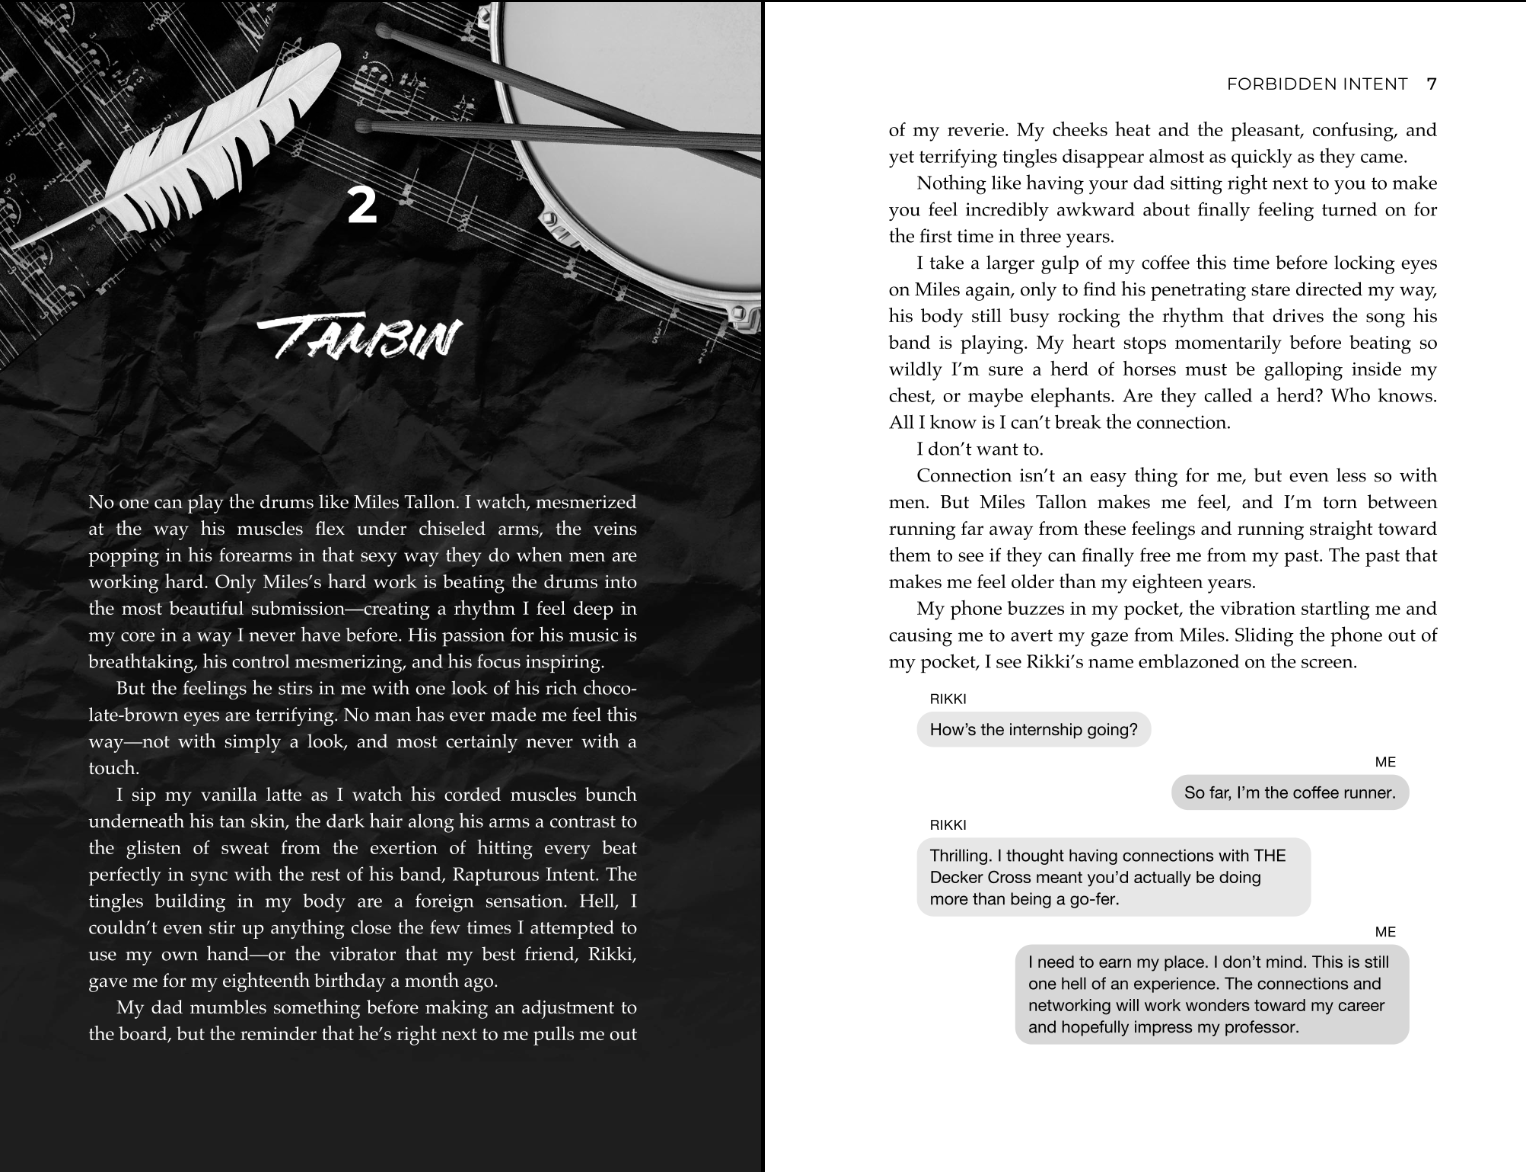 forbidden intent full page chapter headers